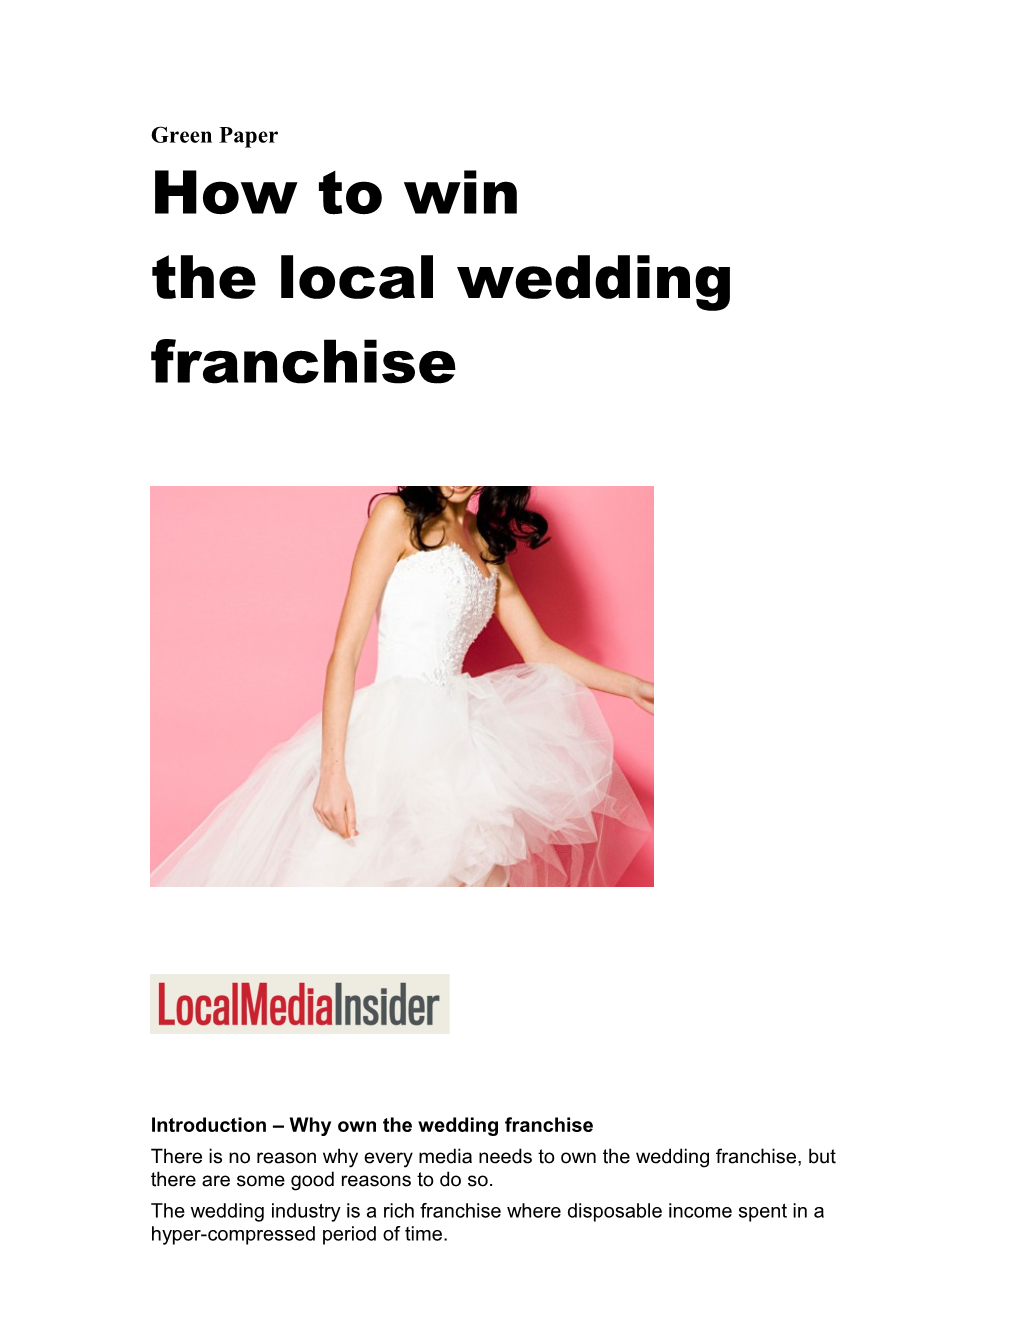 Introduction Why Own the Wedding Franchise